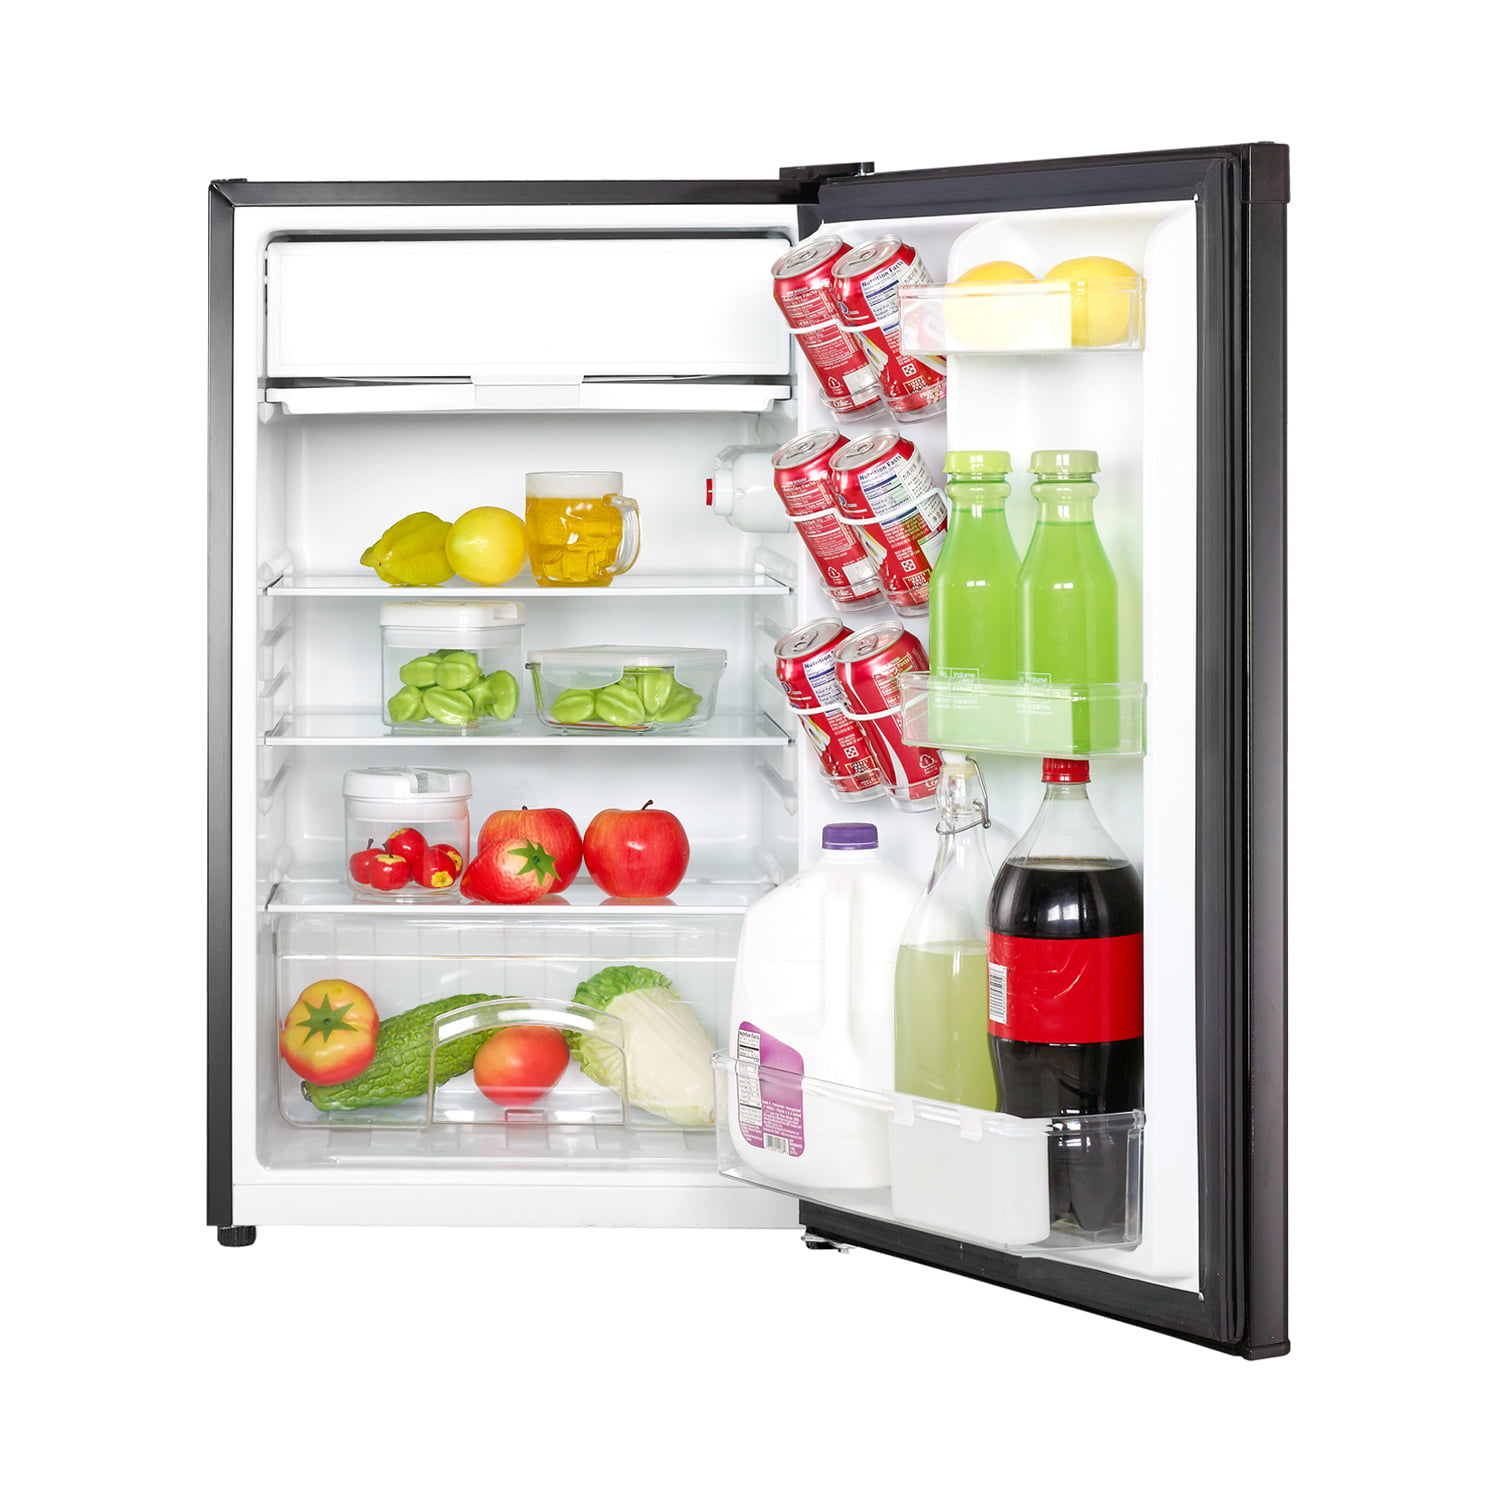 Magic Chef MCBR350B2 Compact Refrigerator with Manual Defrost, Small  Refrigerator for Compact Spaces, 3.5 Cubic Feet, Black